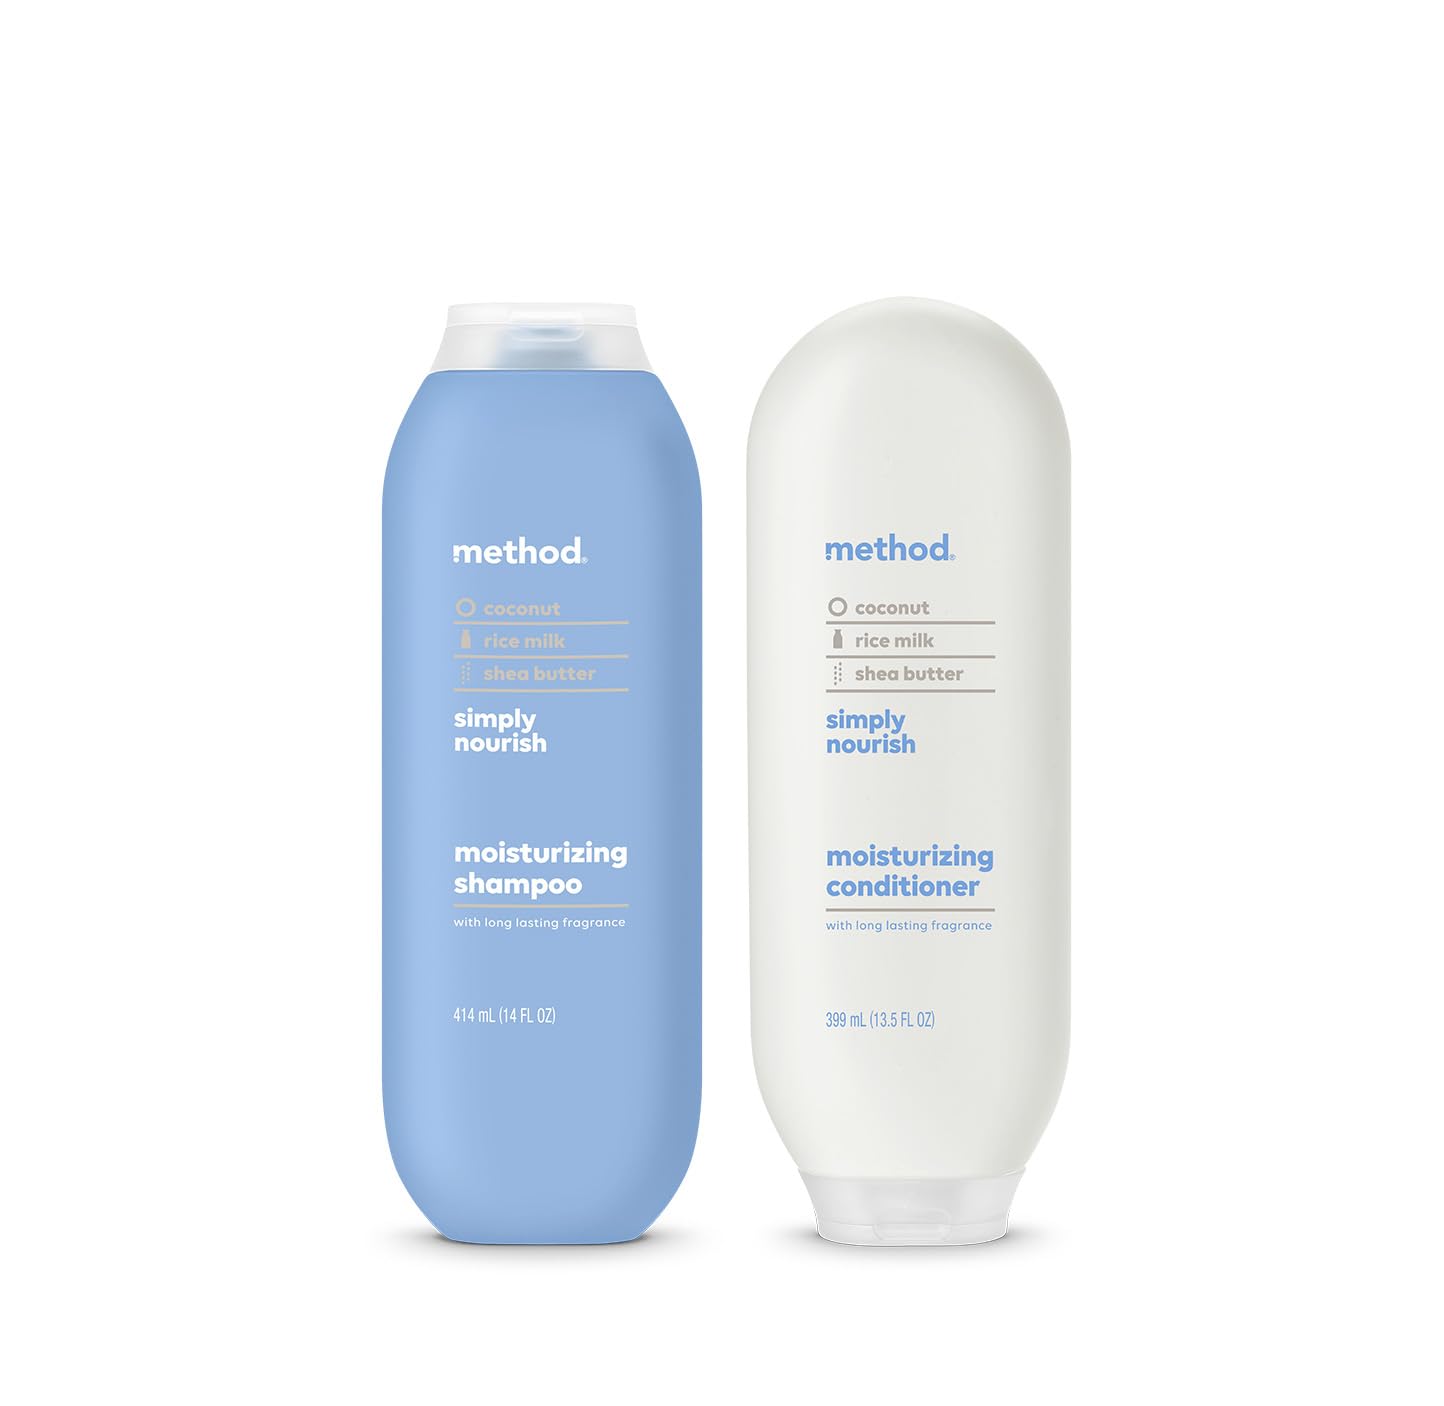 Method Daily Simply Nourish Moisturizing Hair Care Shampoo (14 oz) + Conditioner (13.5 oz) with Shea Butter, Coconut, and Rice Milk, Paraben and Sulfate Free